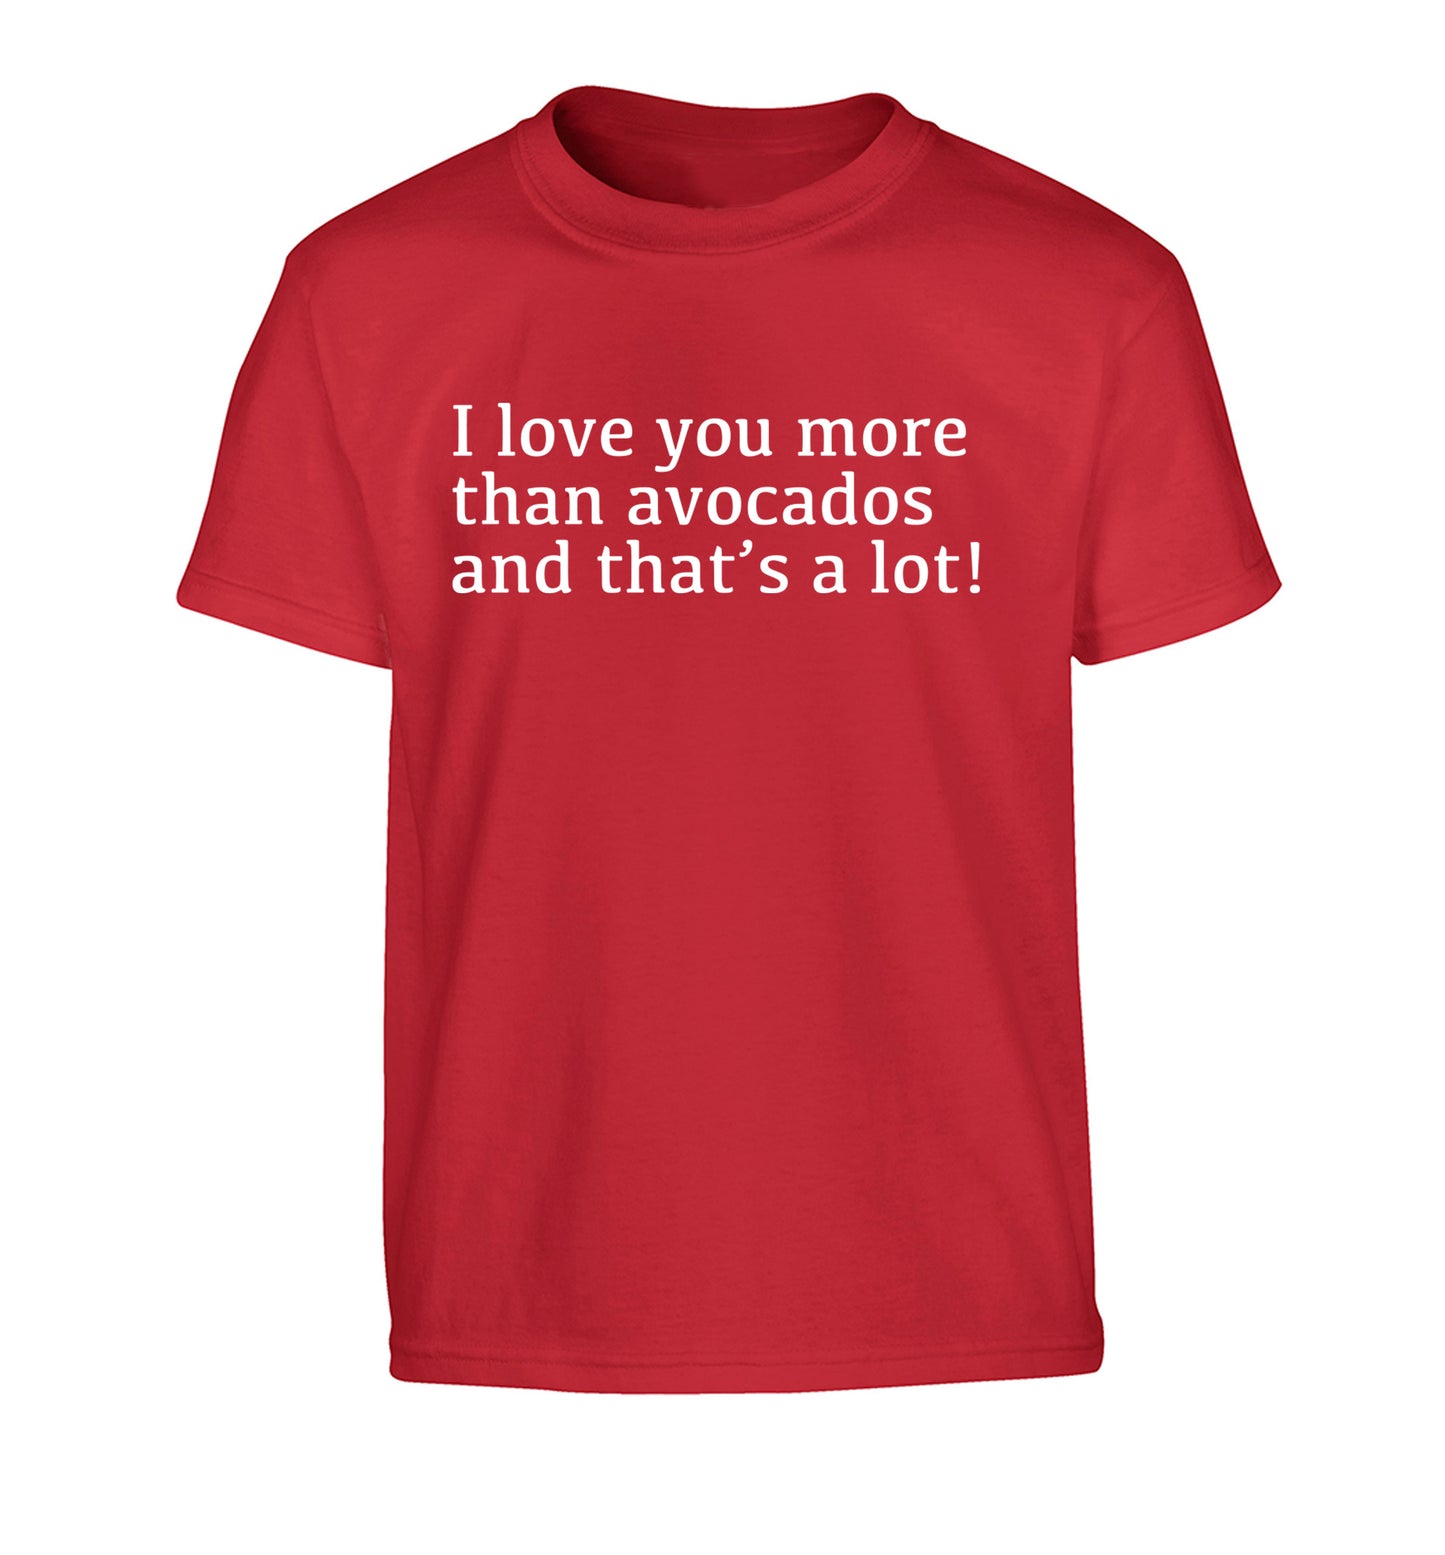 I love you more than avocados and that's a lot Children's red Tshirt 12-14 Years